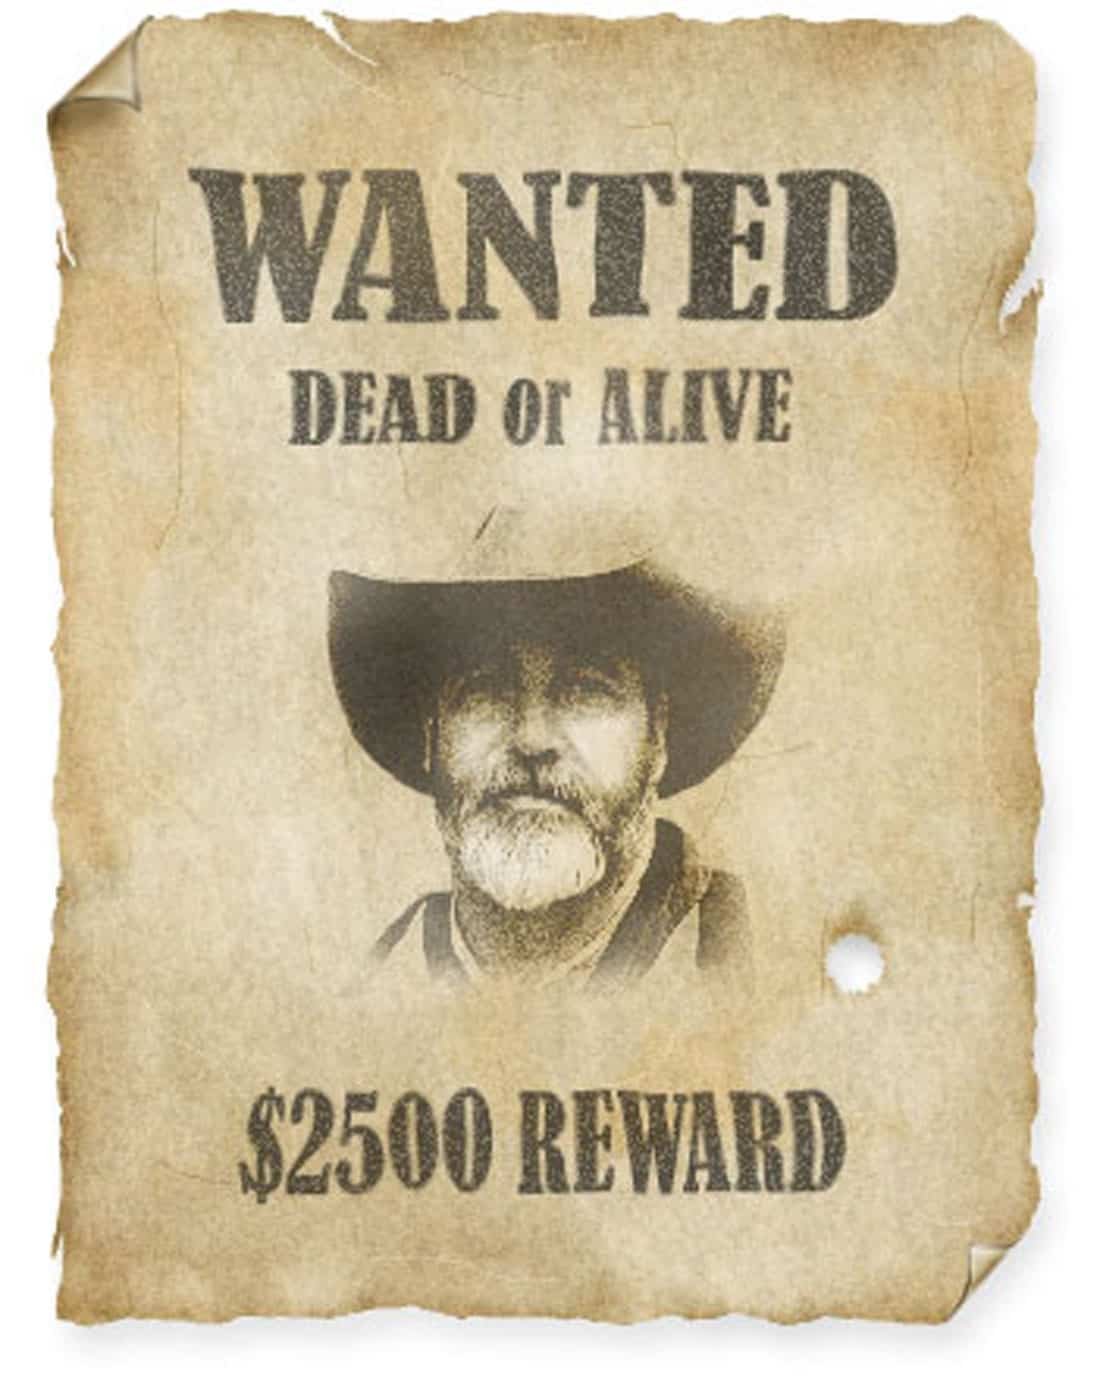 Lived talked wanted. Wanted плакат. Плакат розыска дикий Запад. Wanted листовка. Плакат разыскивается.